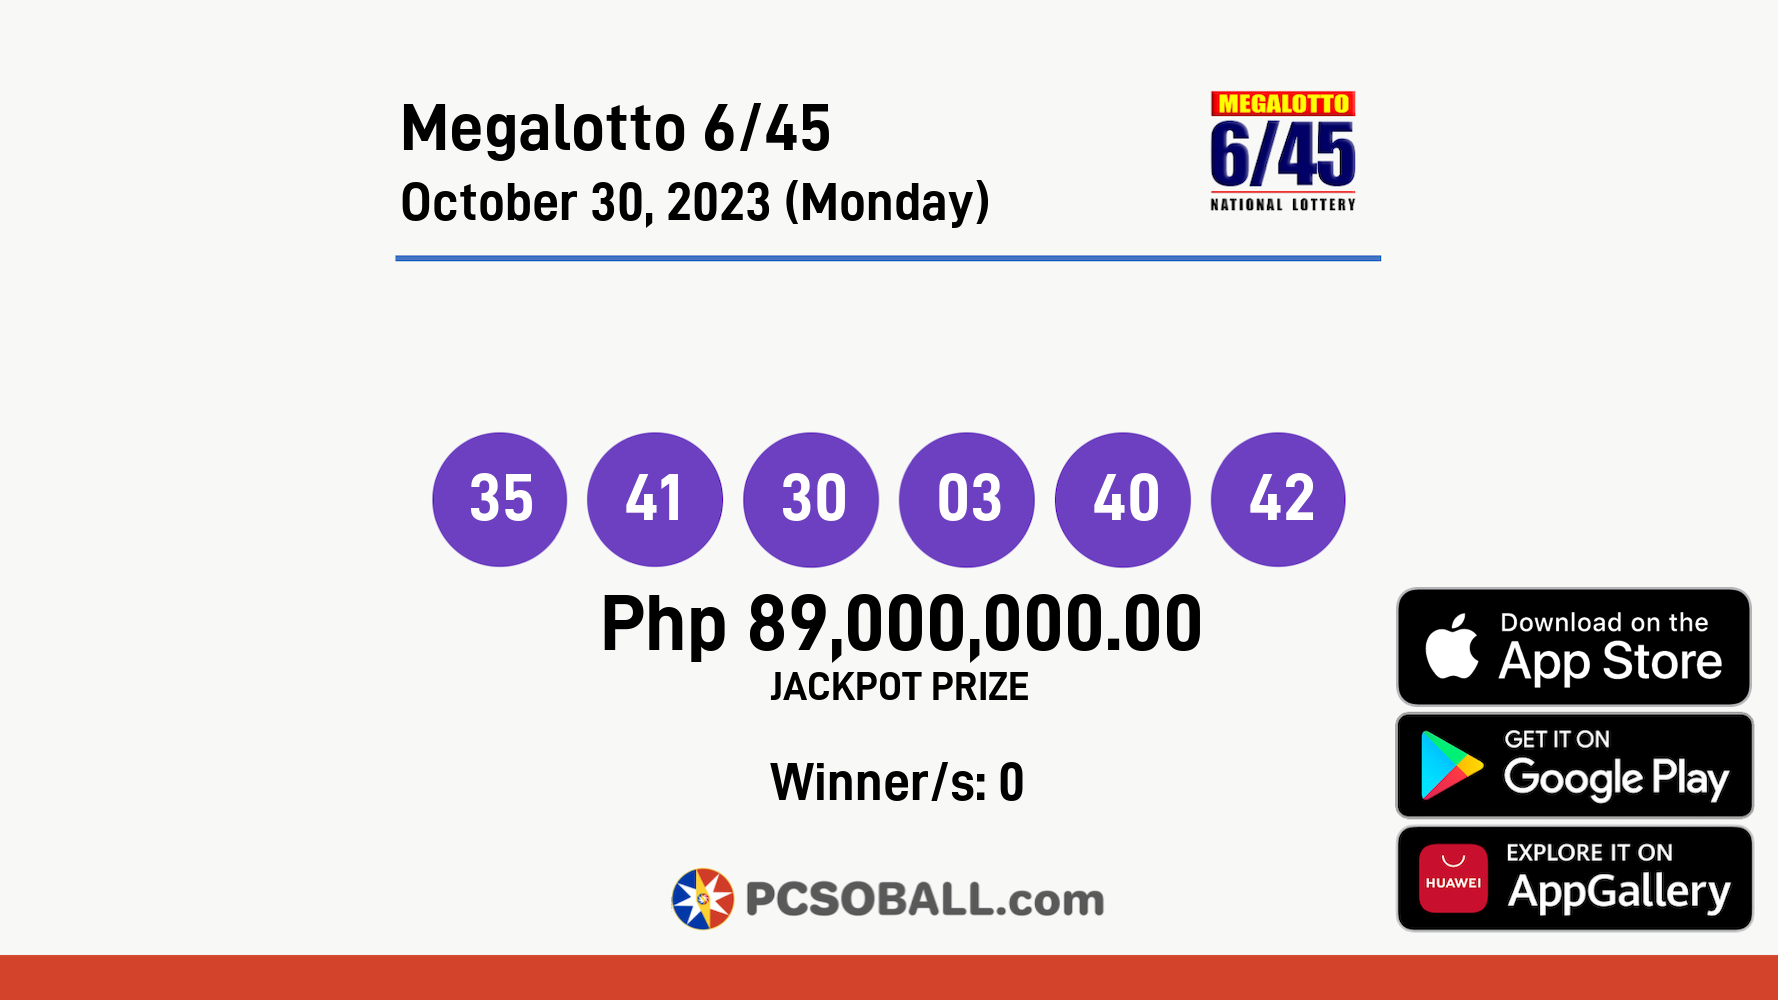 Megalotto 6/45 October 30, 2023 (Monday) Result